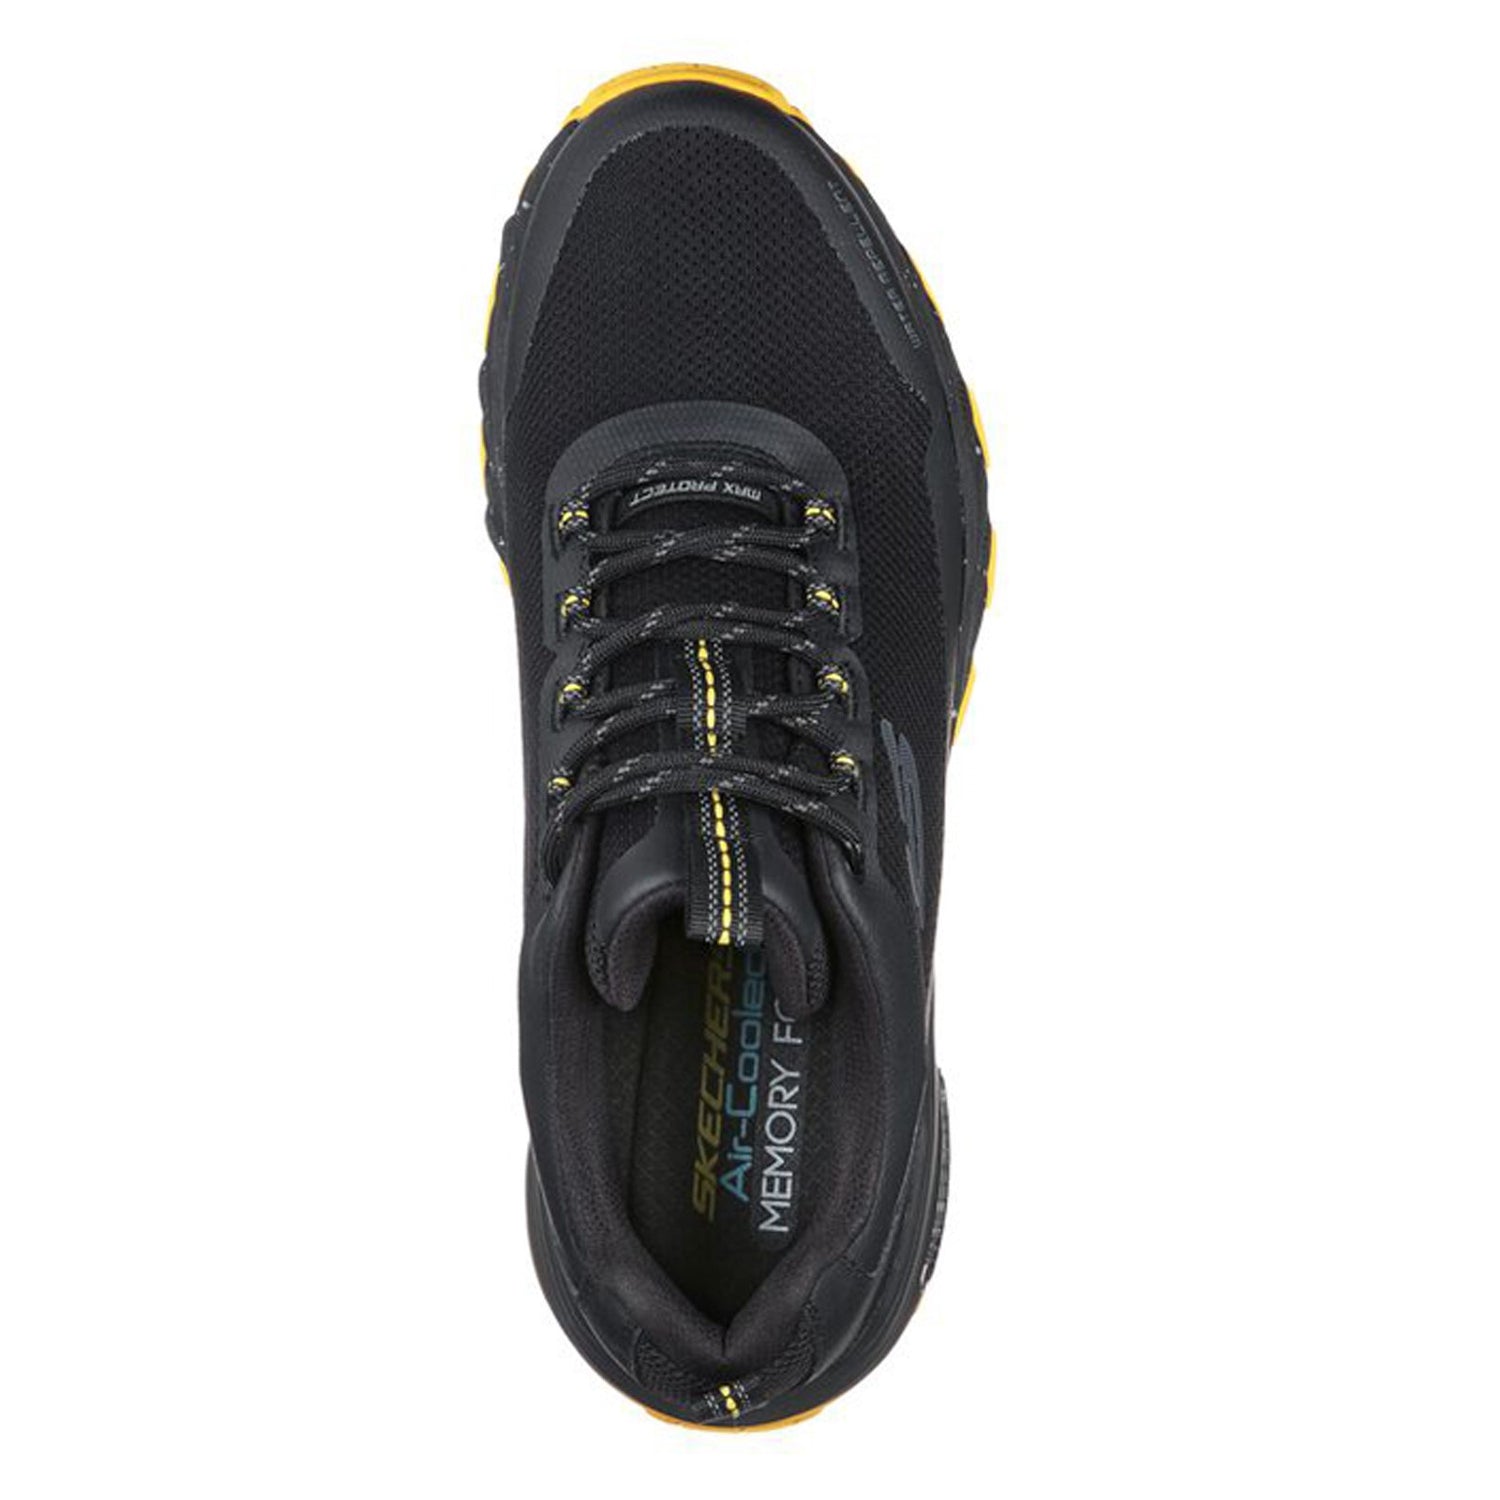 Peltz Shoes  Men's Skechers Max Protect - Liberated Hiking Shoe Black/Yellow 237301-BKYL